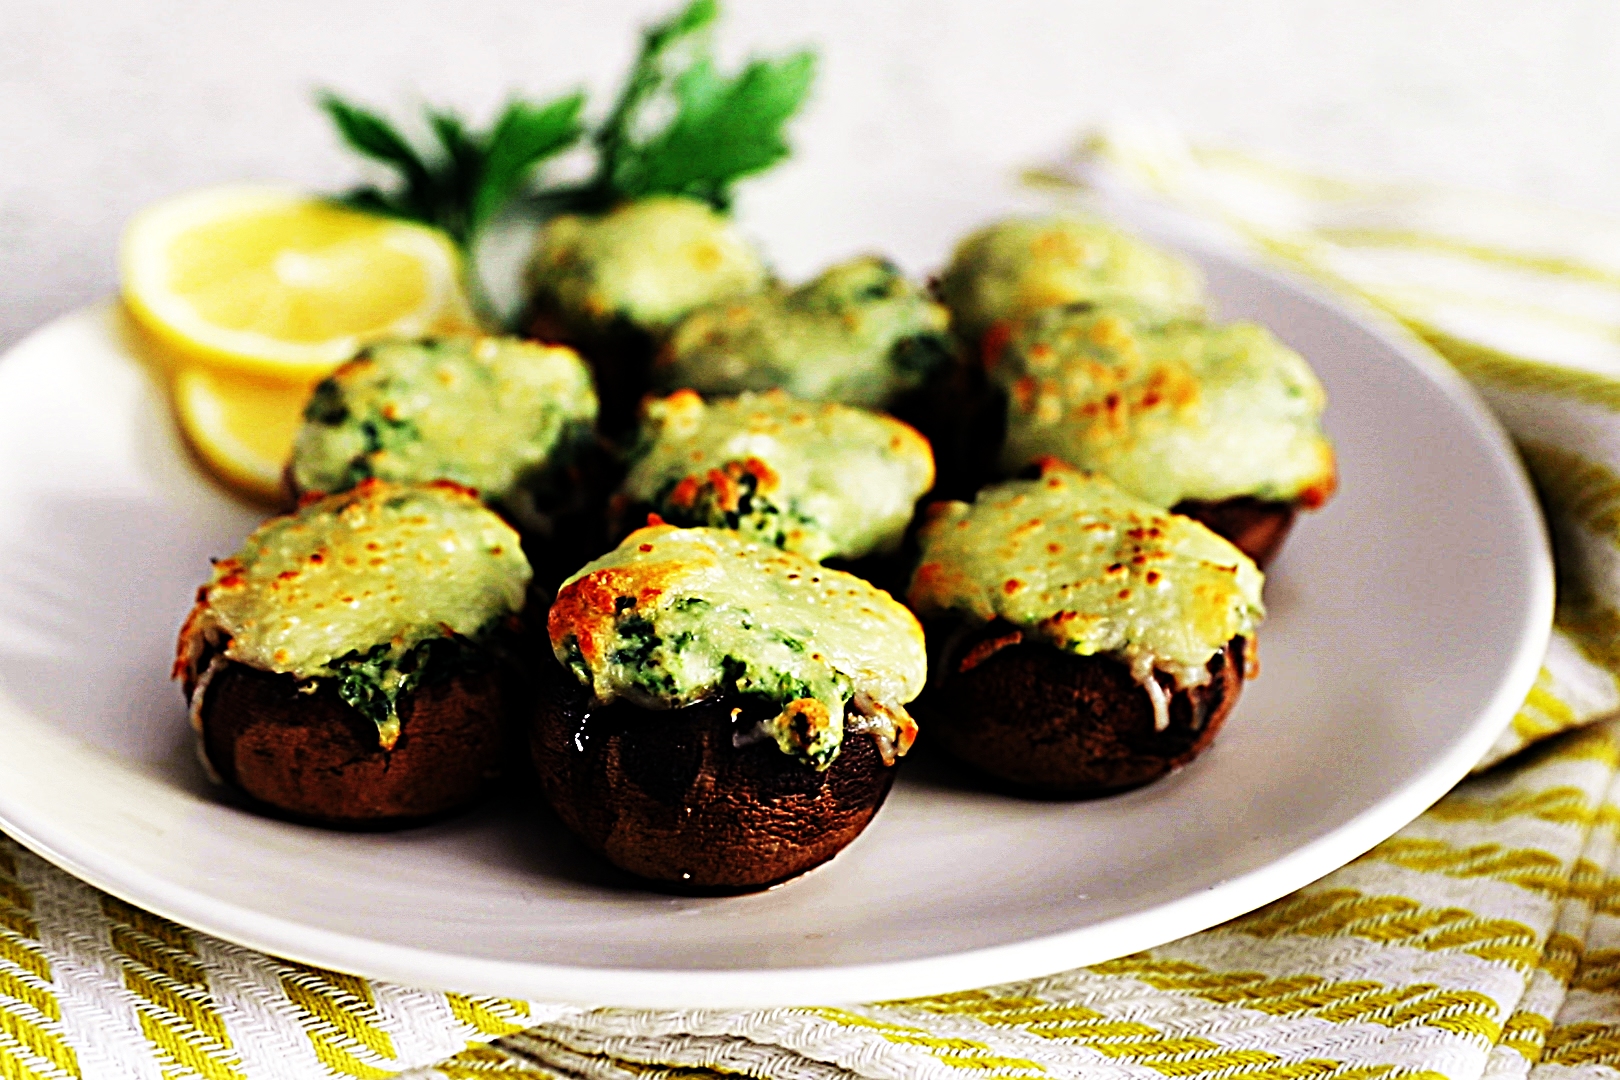 Stupid-Easy Recipe for Creamy Spinach Stuffed Mushrooms (#1 Top-Rated)